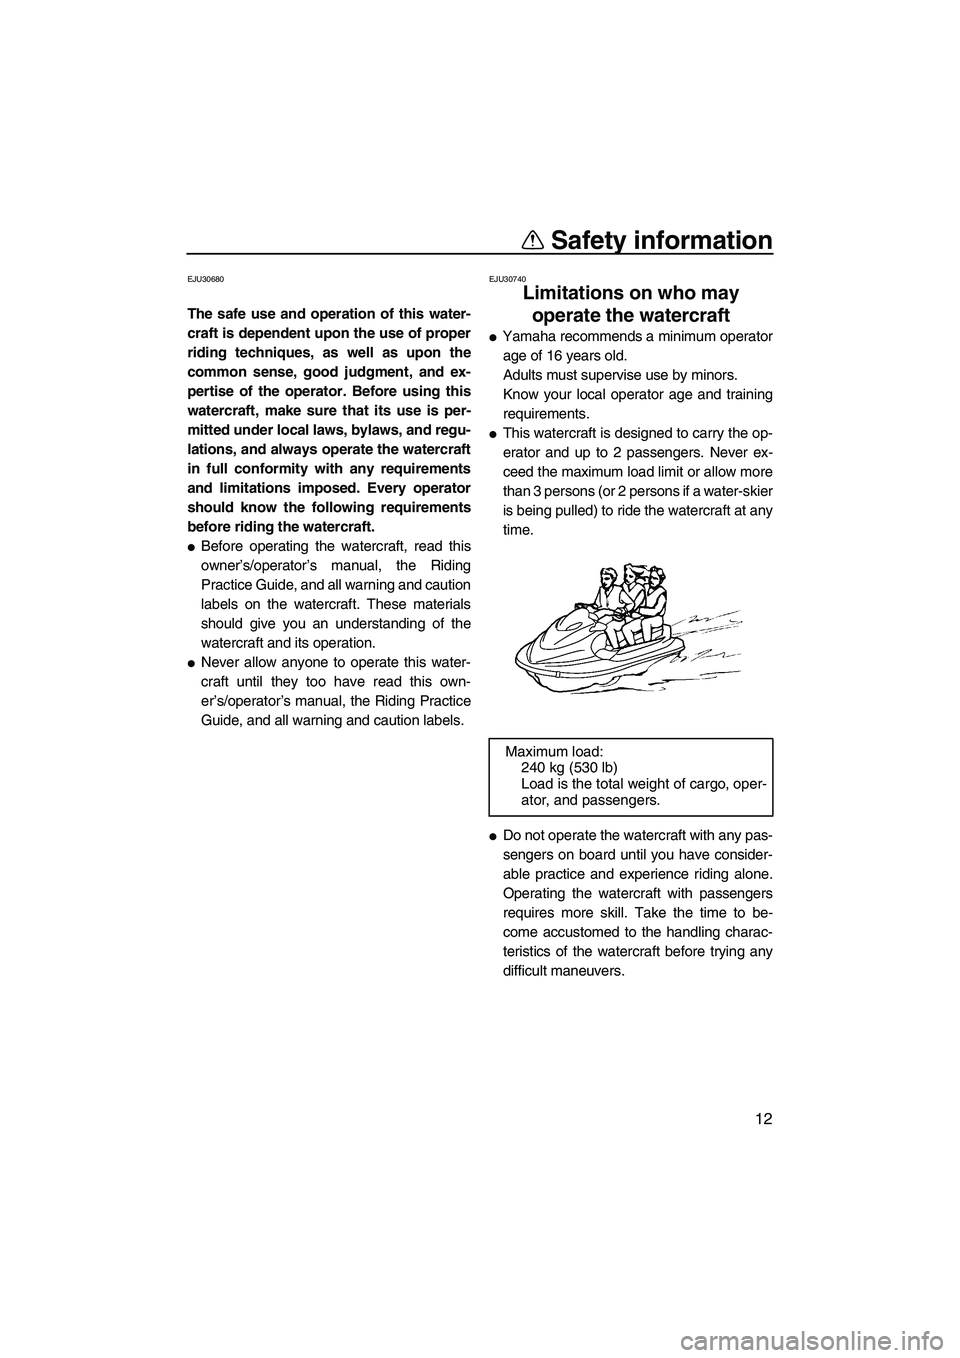 YAMAHA VX SPORT 2007 User Guide Safety information
12
EJU30680
The safe use and operation of this water-
craft is dependent upon the use of proper
riding techniques, as well as upon the
common sense, good judgment, and ex-
pertise o